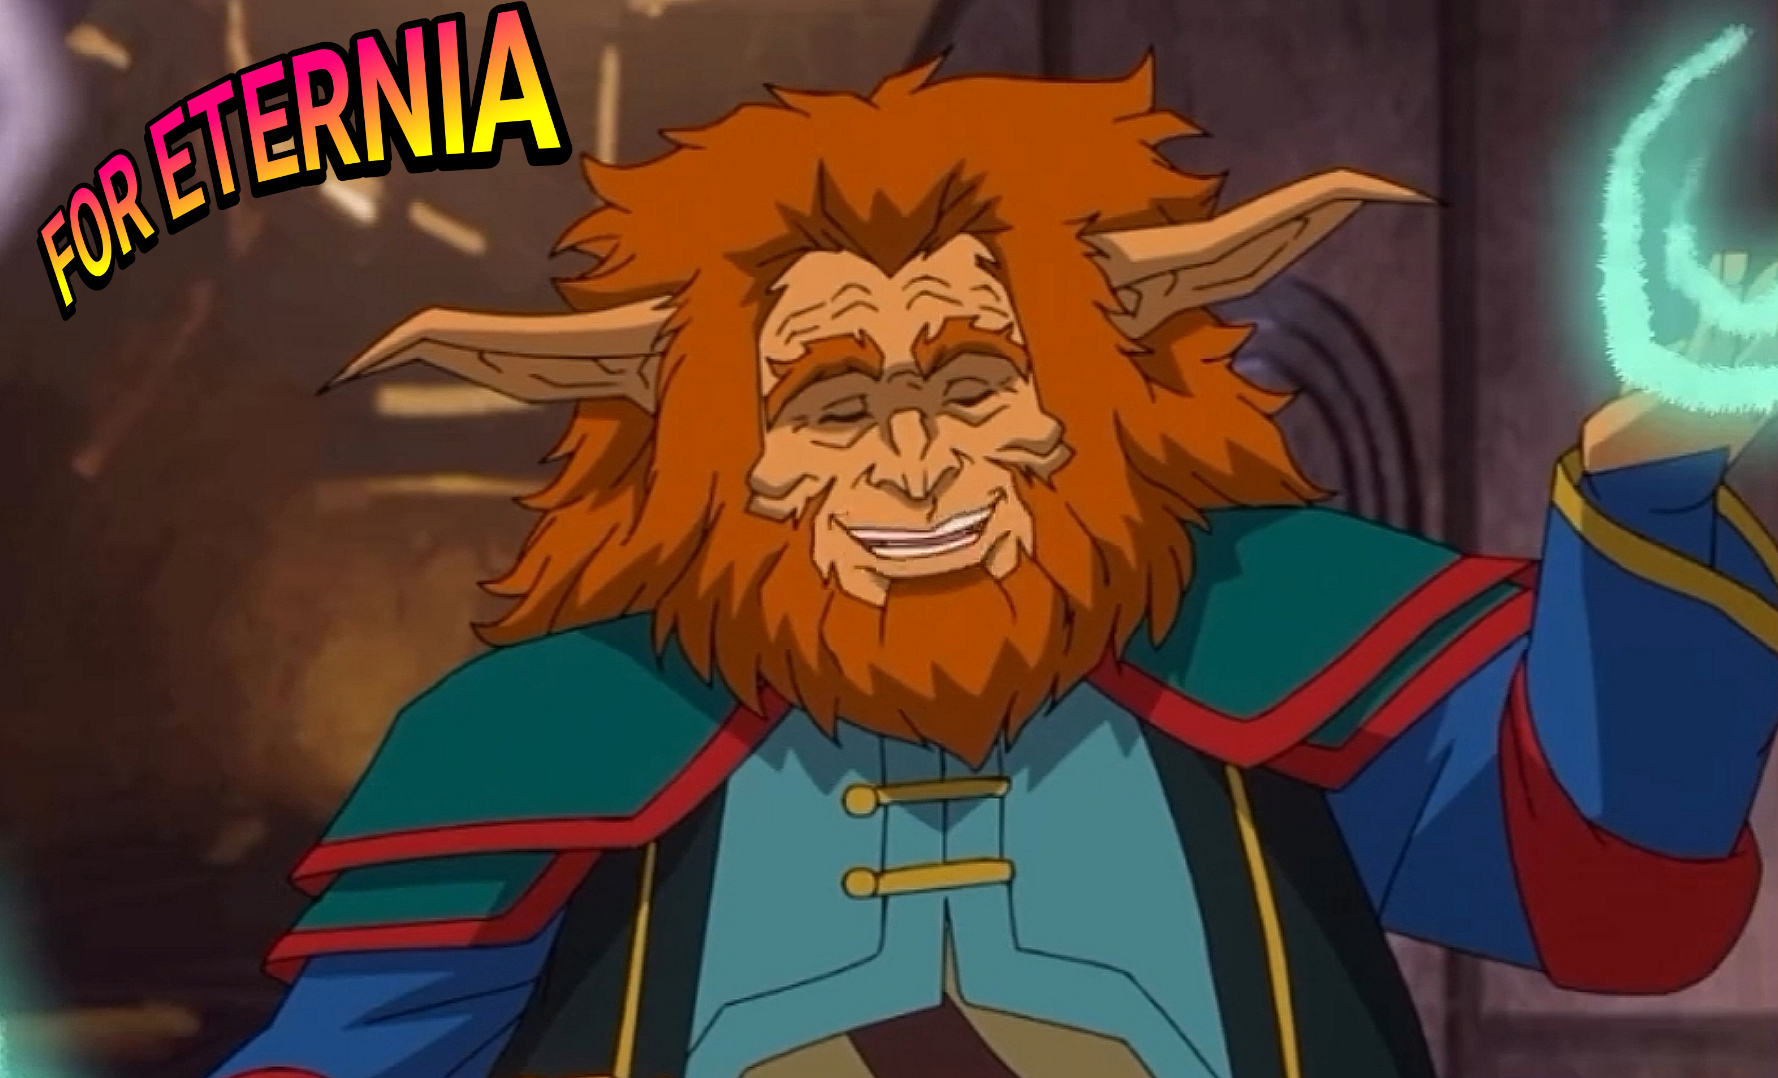 Hear Gwildor’s voice in the latest ”Masters of the Universe” promotional video